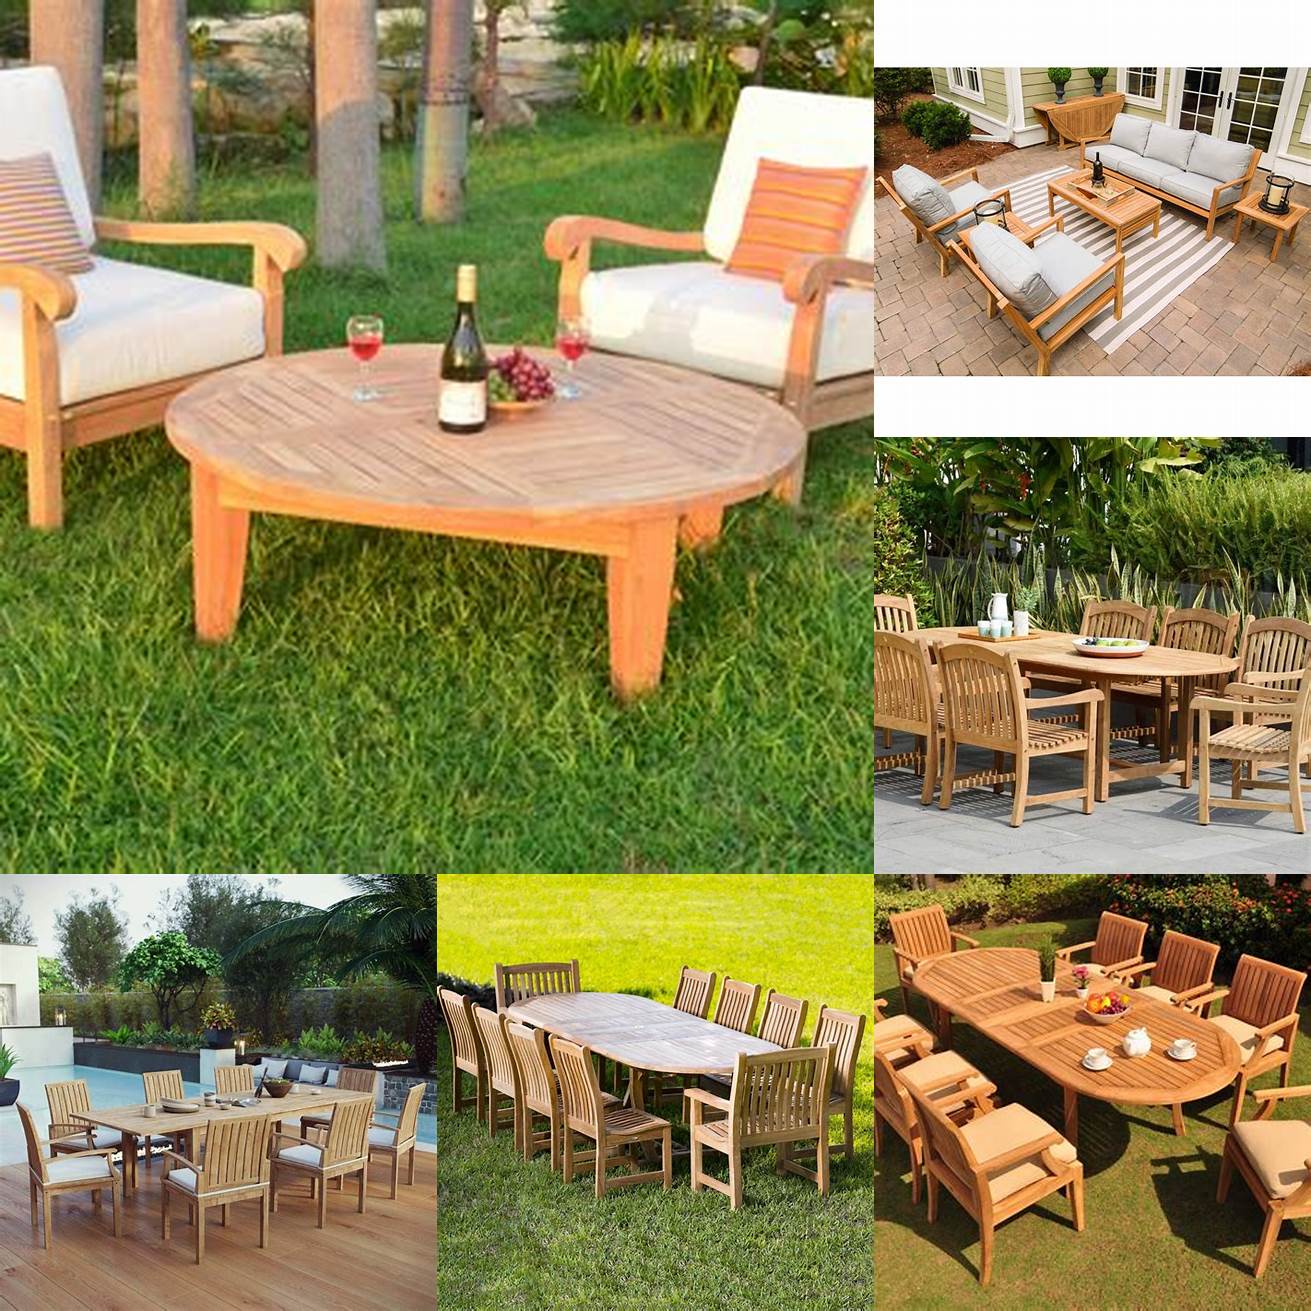 A picture of teak outdoor furniture in a sunny outdoor setting